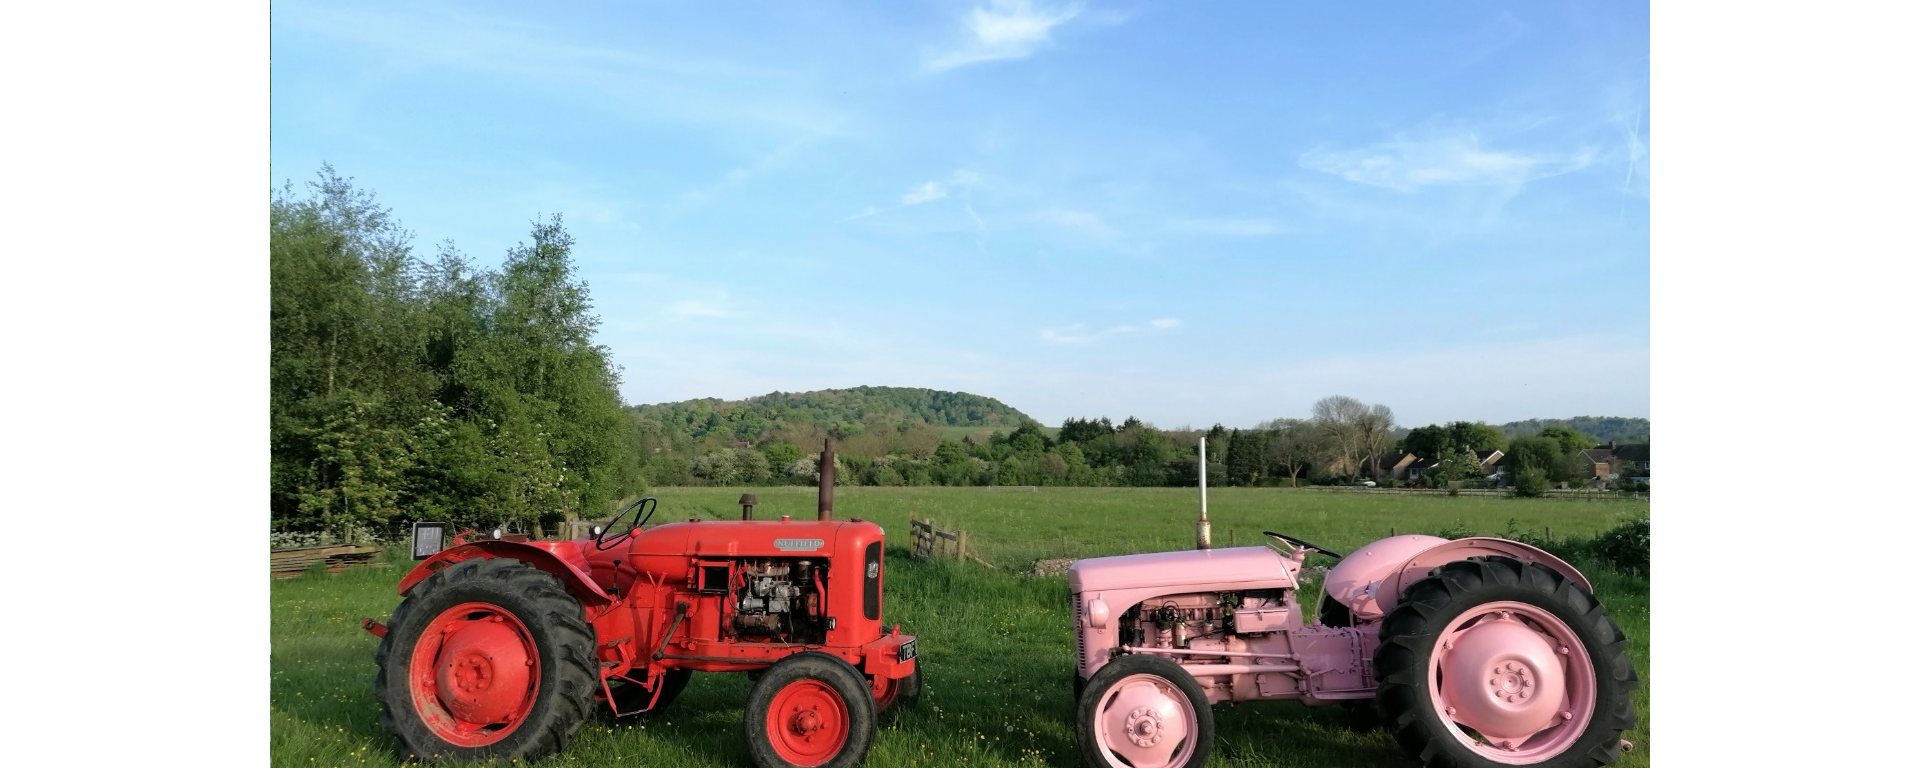 Third prize: Vintage tractors with a view of Great Kimble by Lisa Brown